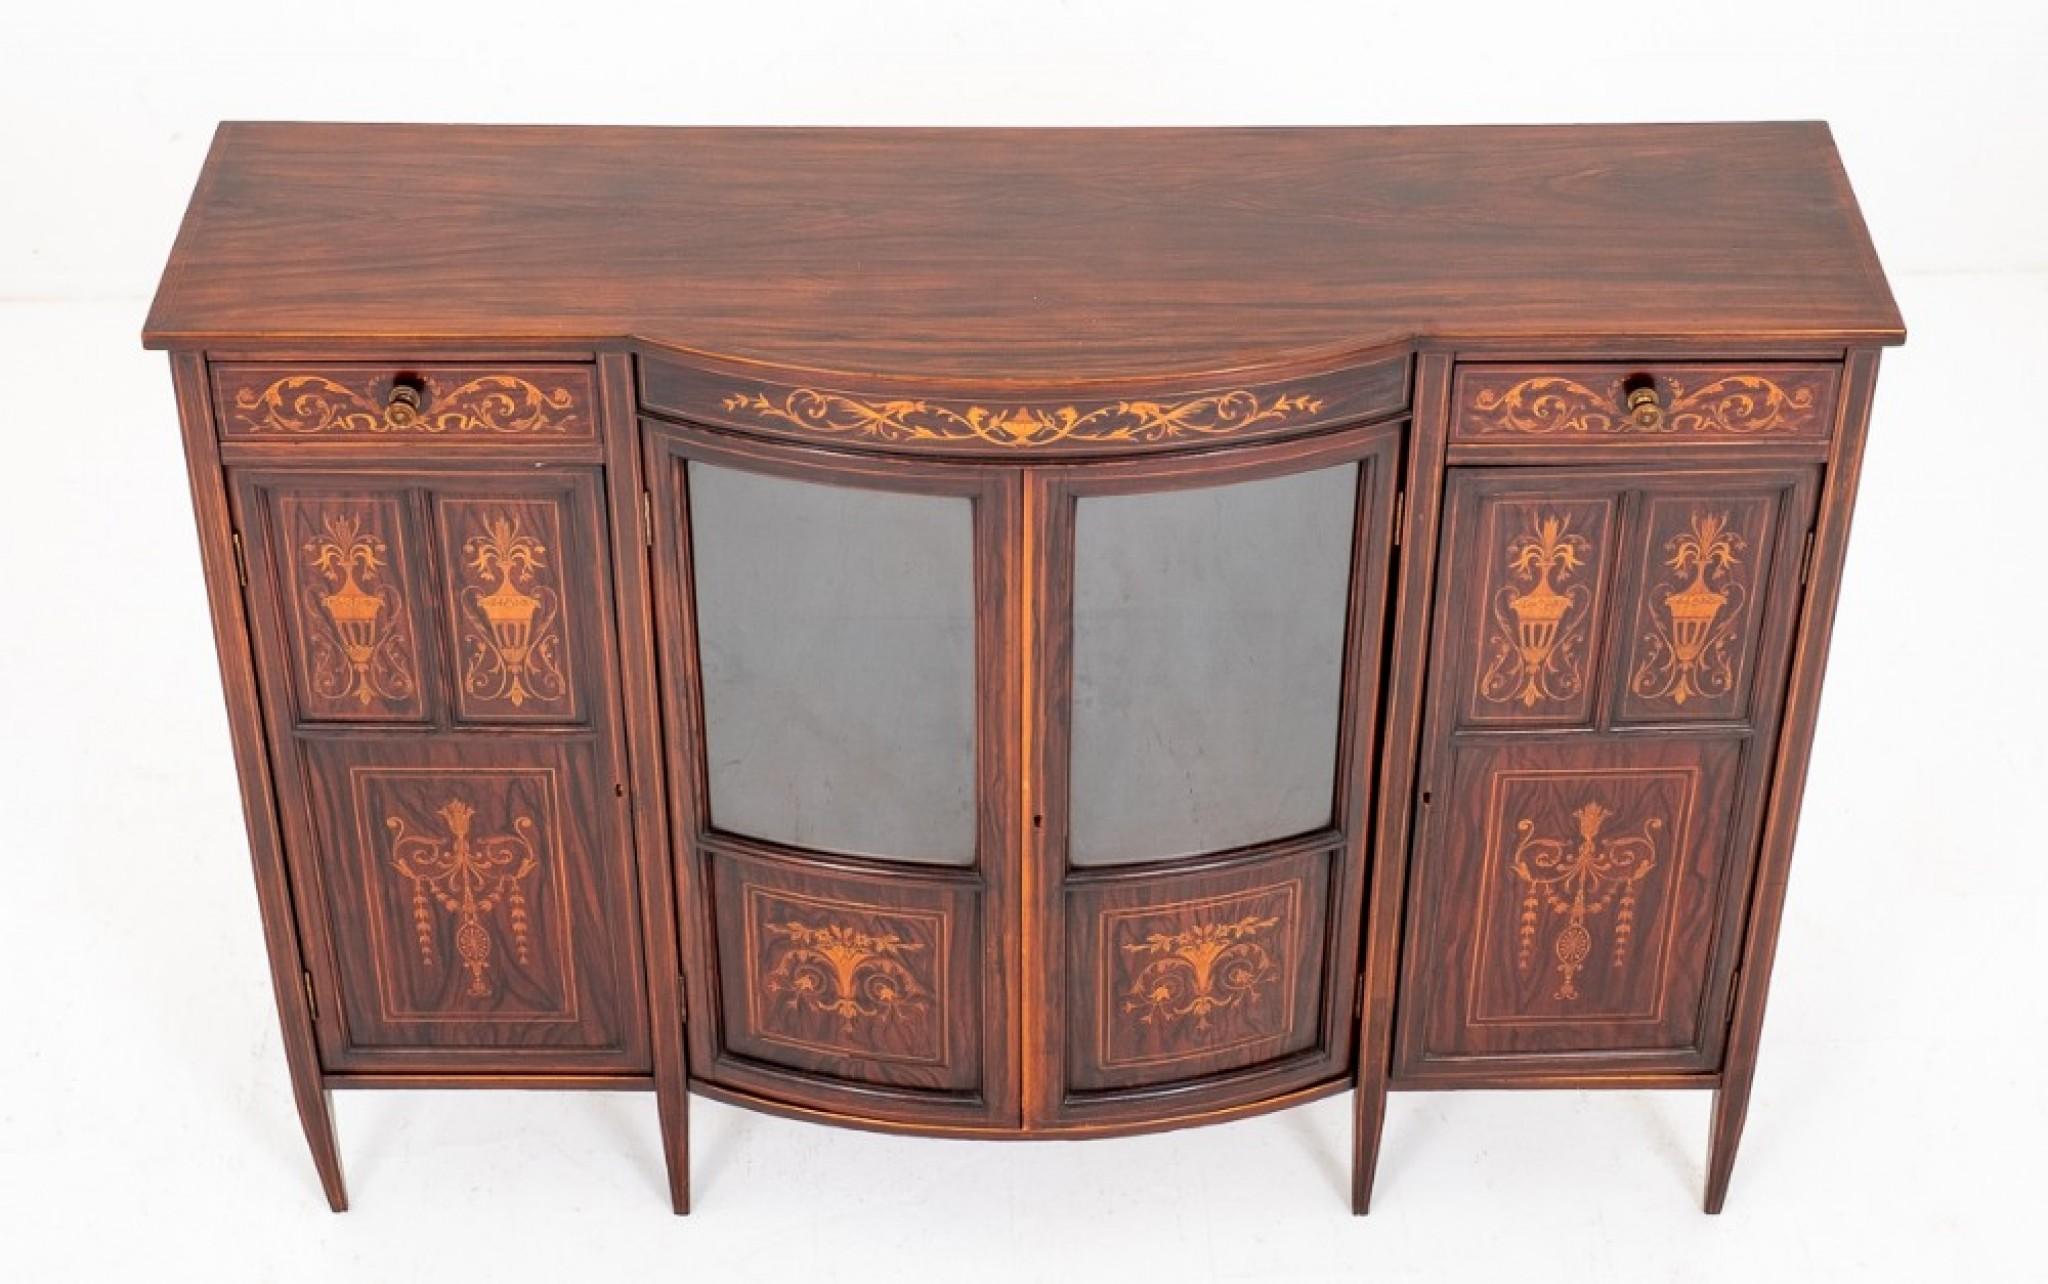 Superb Edwards and Roberts Sheraton Revival side cabinet.
This Superb Cabinet Features Bowed Central Doors flanked by 2 panelled Doors with 2 Mahogany Lined Drawers above one bearing the Edwards and Roberts Stamp. Circa 1880
(Founded in 1845,